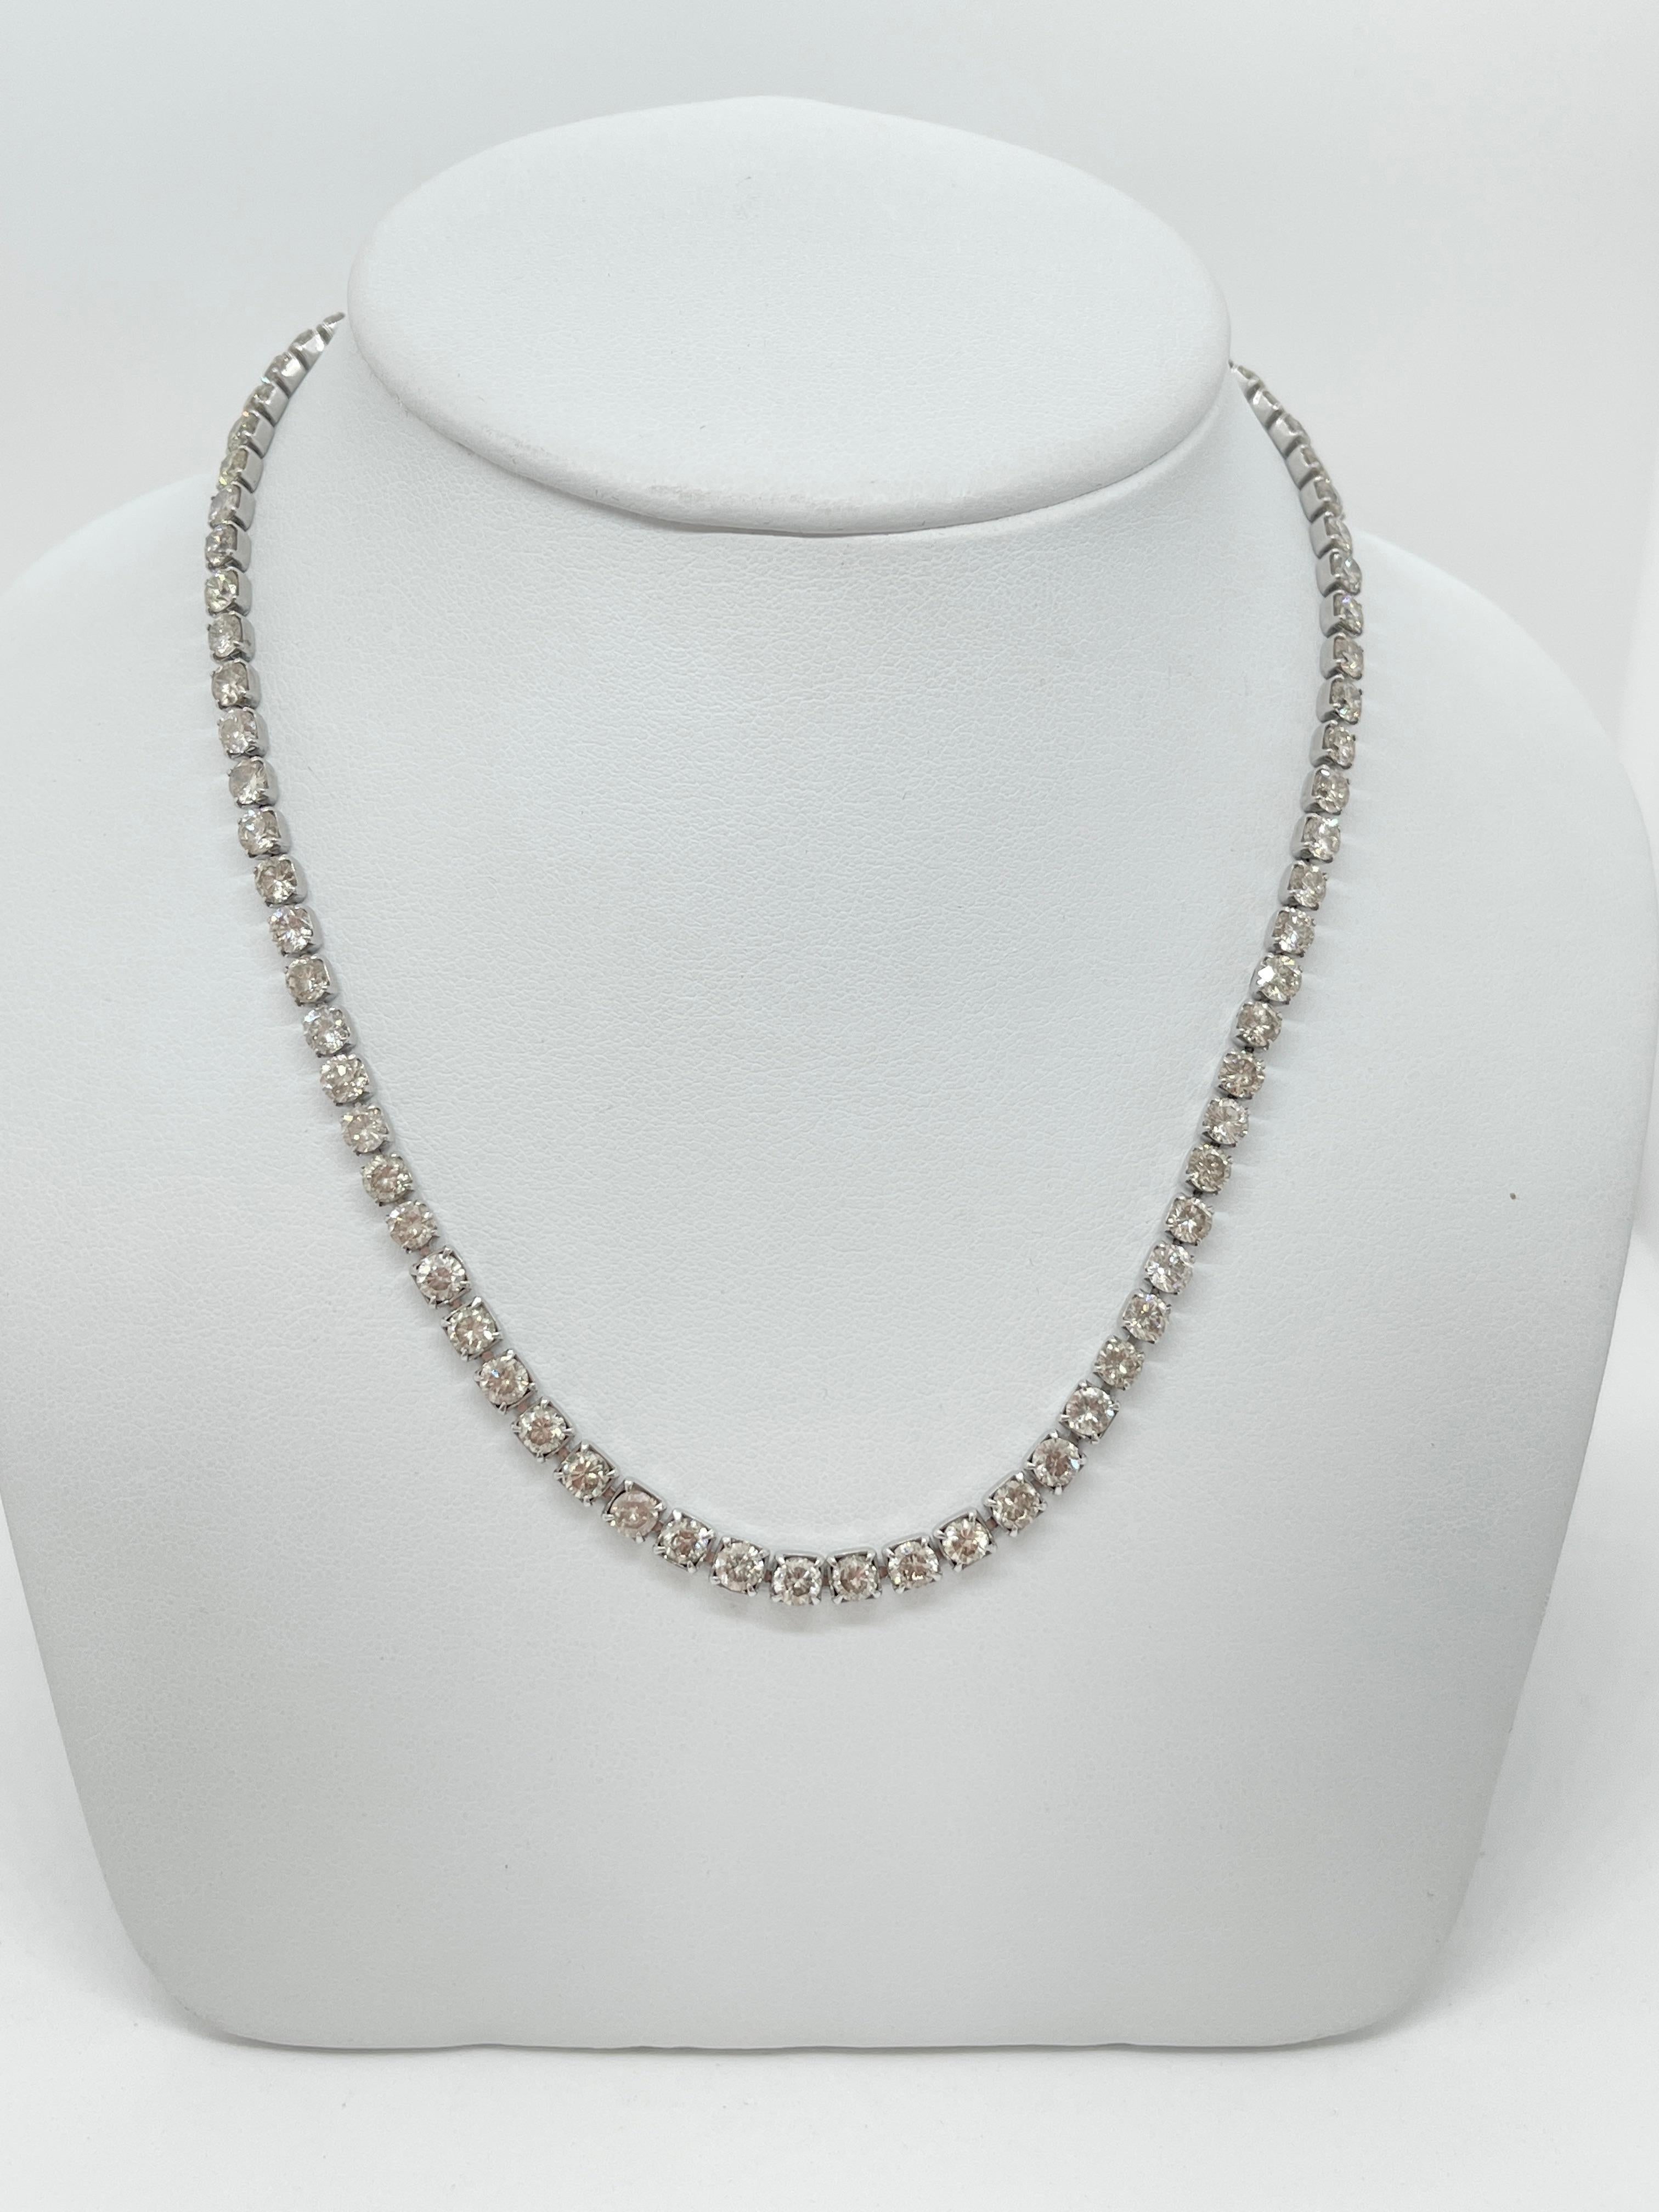 Round Cut Vintage Earth Mined Genuine Diamond Platinum Necklace Circa 1940s with Valuation For Sale